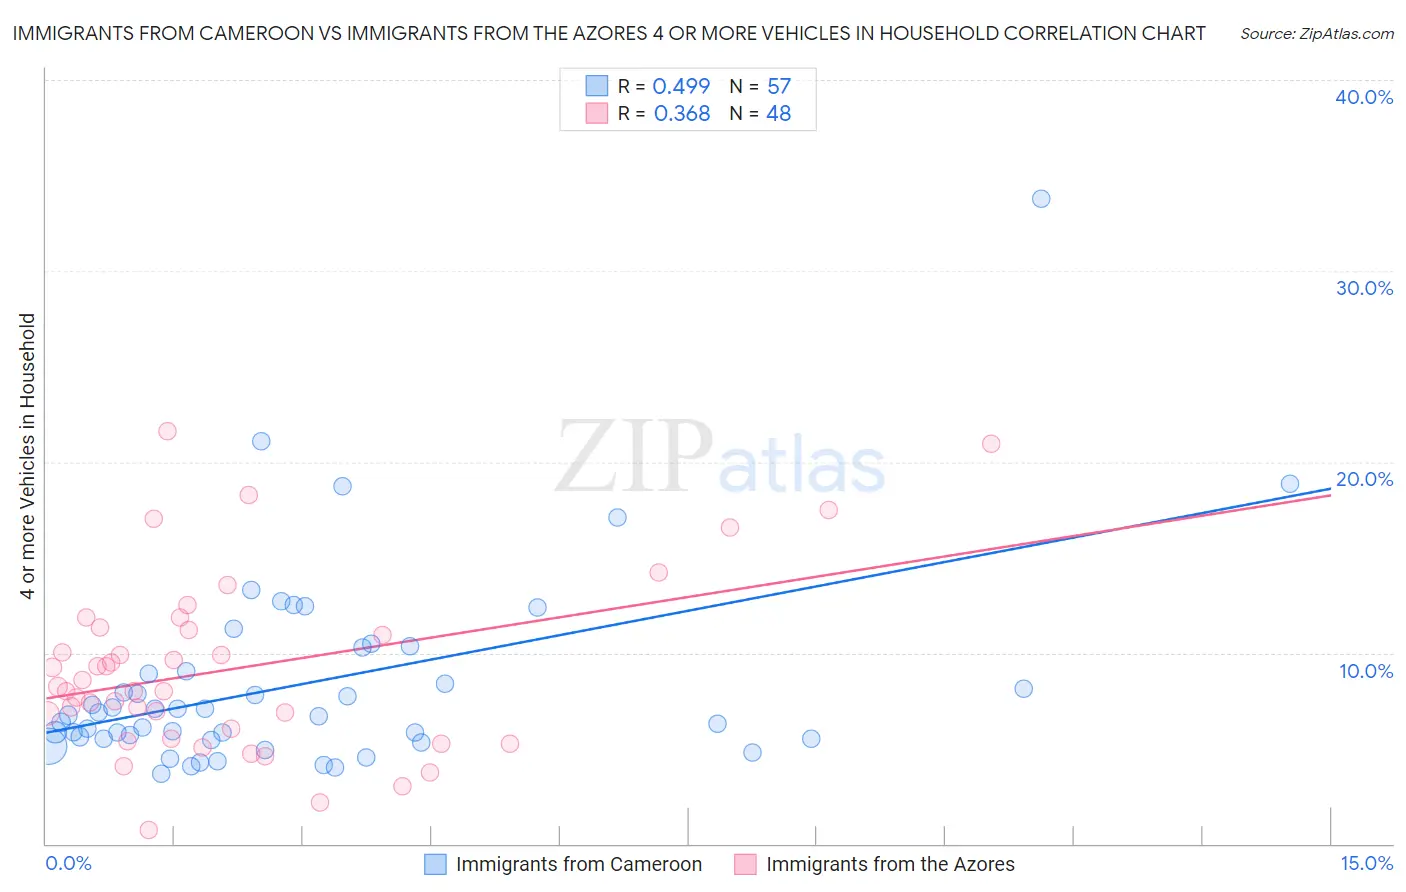 Immigrants from Cameroon vs Immigrants from the Azores 4 or more Vehicles in Household